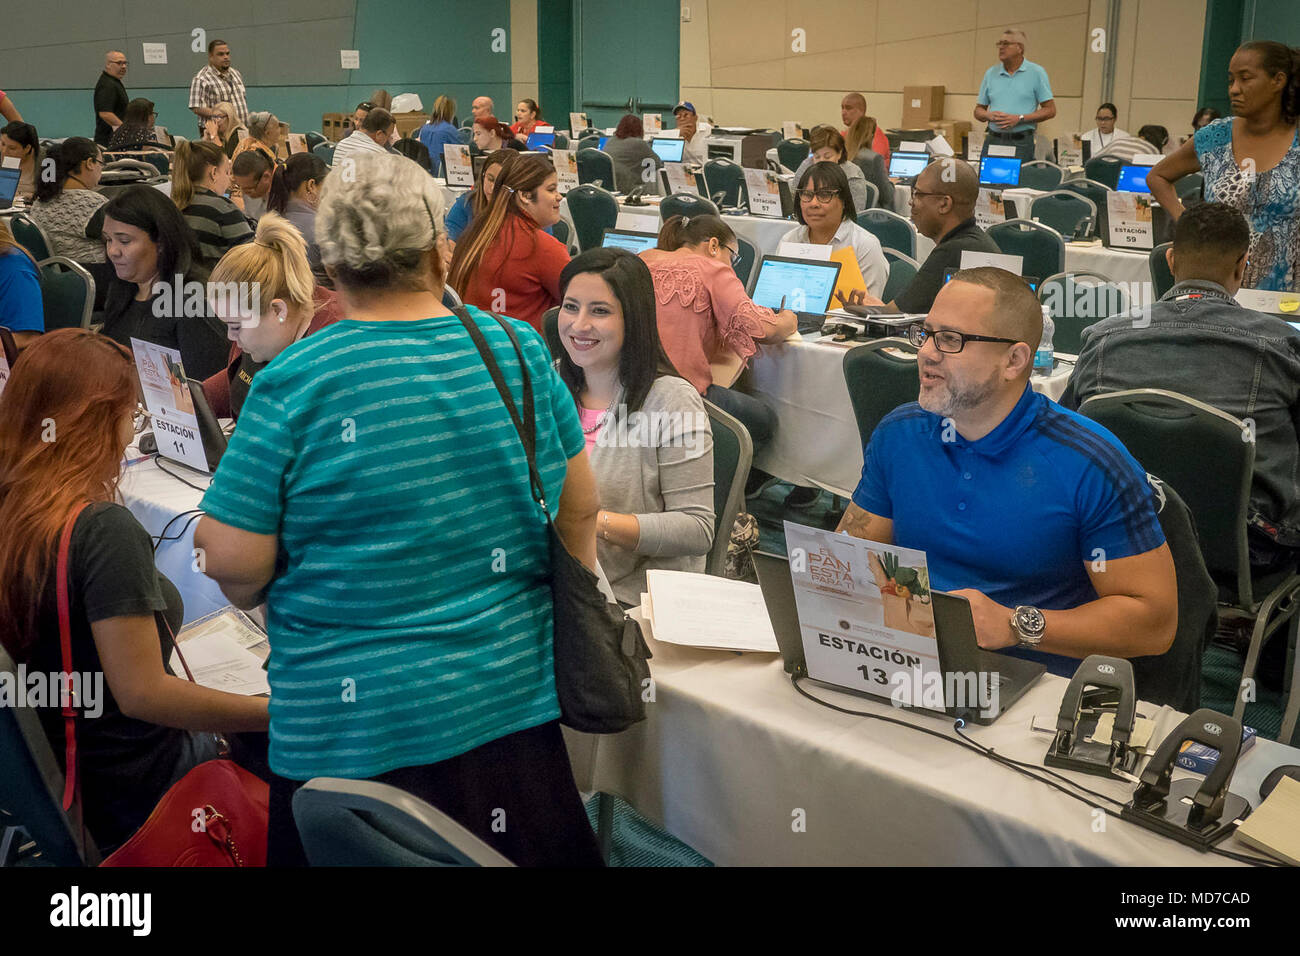 Thousands of residents line up at the San Juan Convention Center, Puerto Rico, March 22, 2018, to receive their share of the $1.27 billion grant for emergency relief and Nutrition Assistance Program (NAP) after Hurricane Maria. The temporary program will provide one year financial assistance towards nutrition assistance for those who qualify. The program is funded by the U.S. Department of Agriculture (USDA) and administered by the Departamento de la Familia. Stock Photo